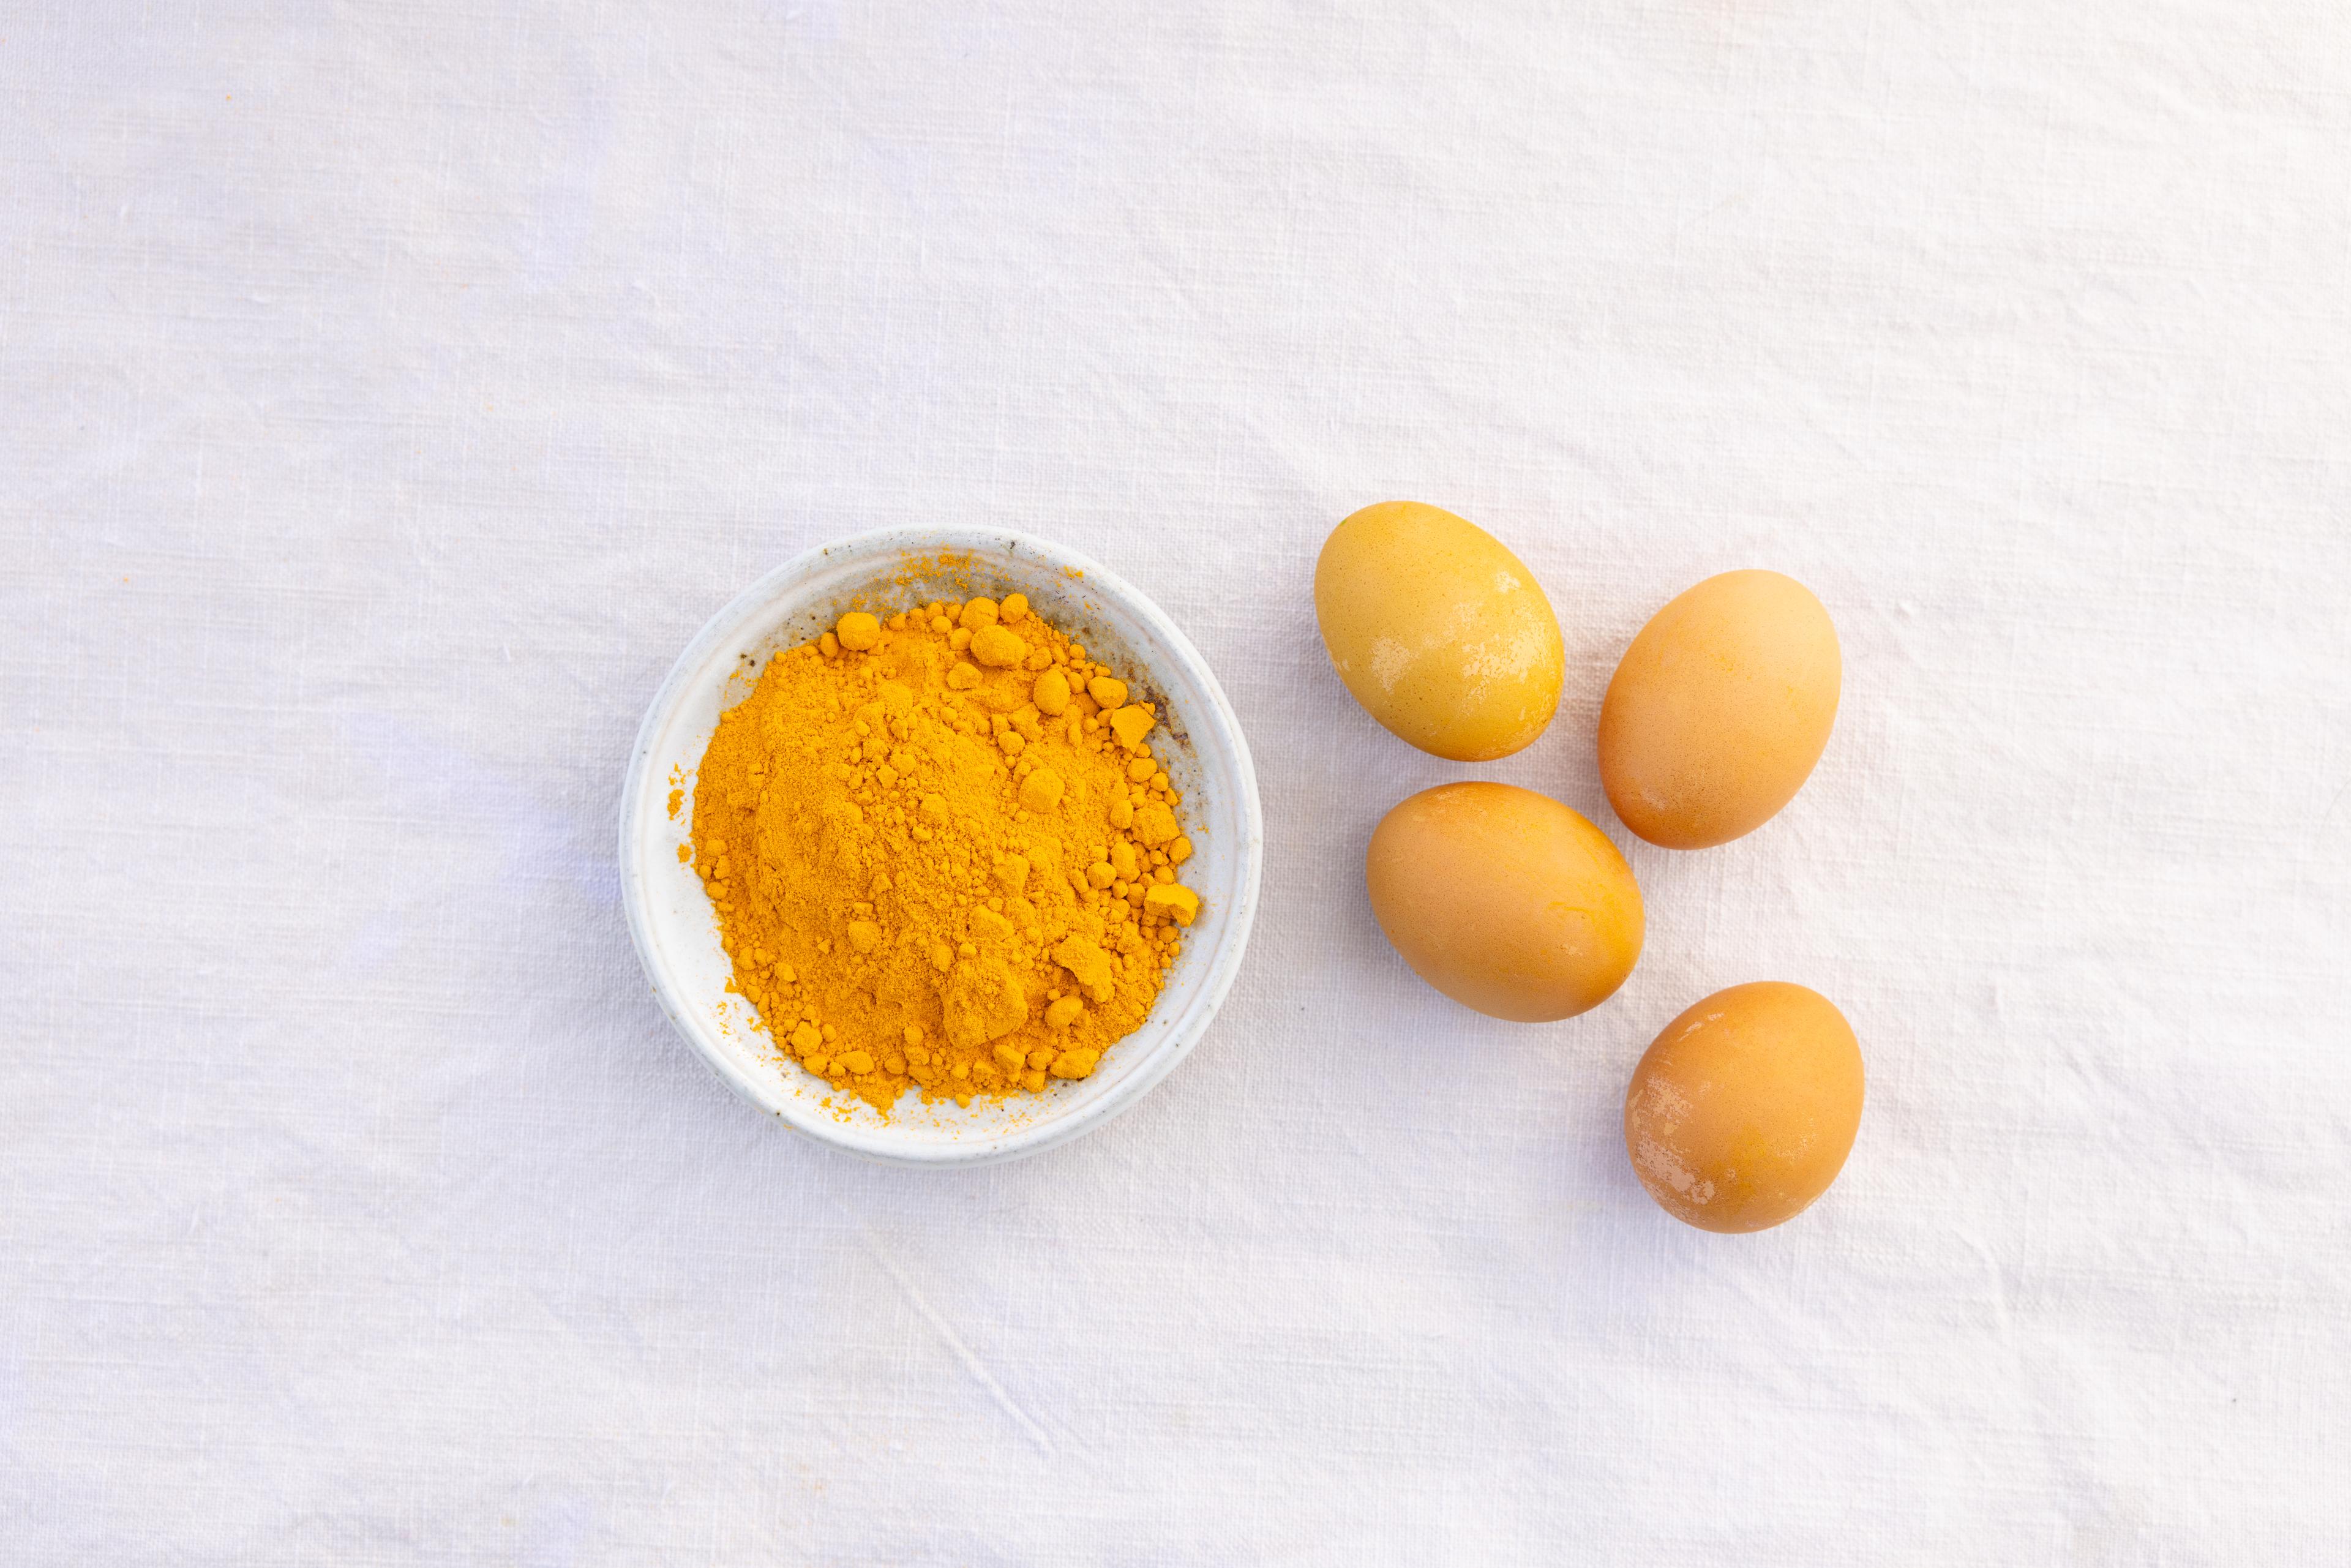 Turmeric powder next to eggs dyed with it.